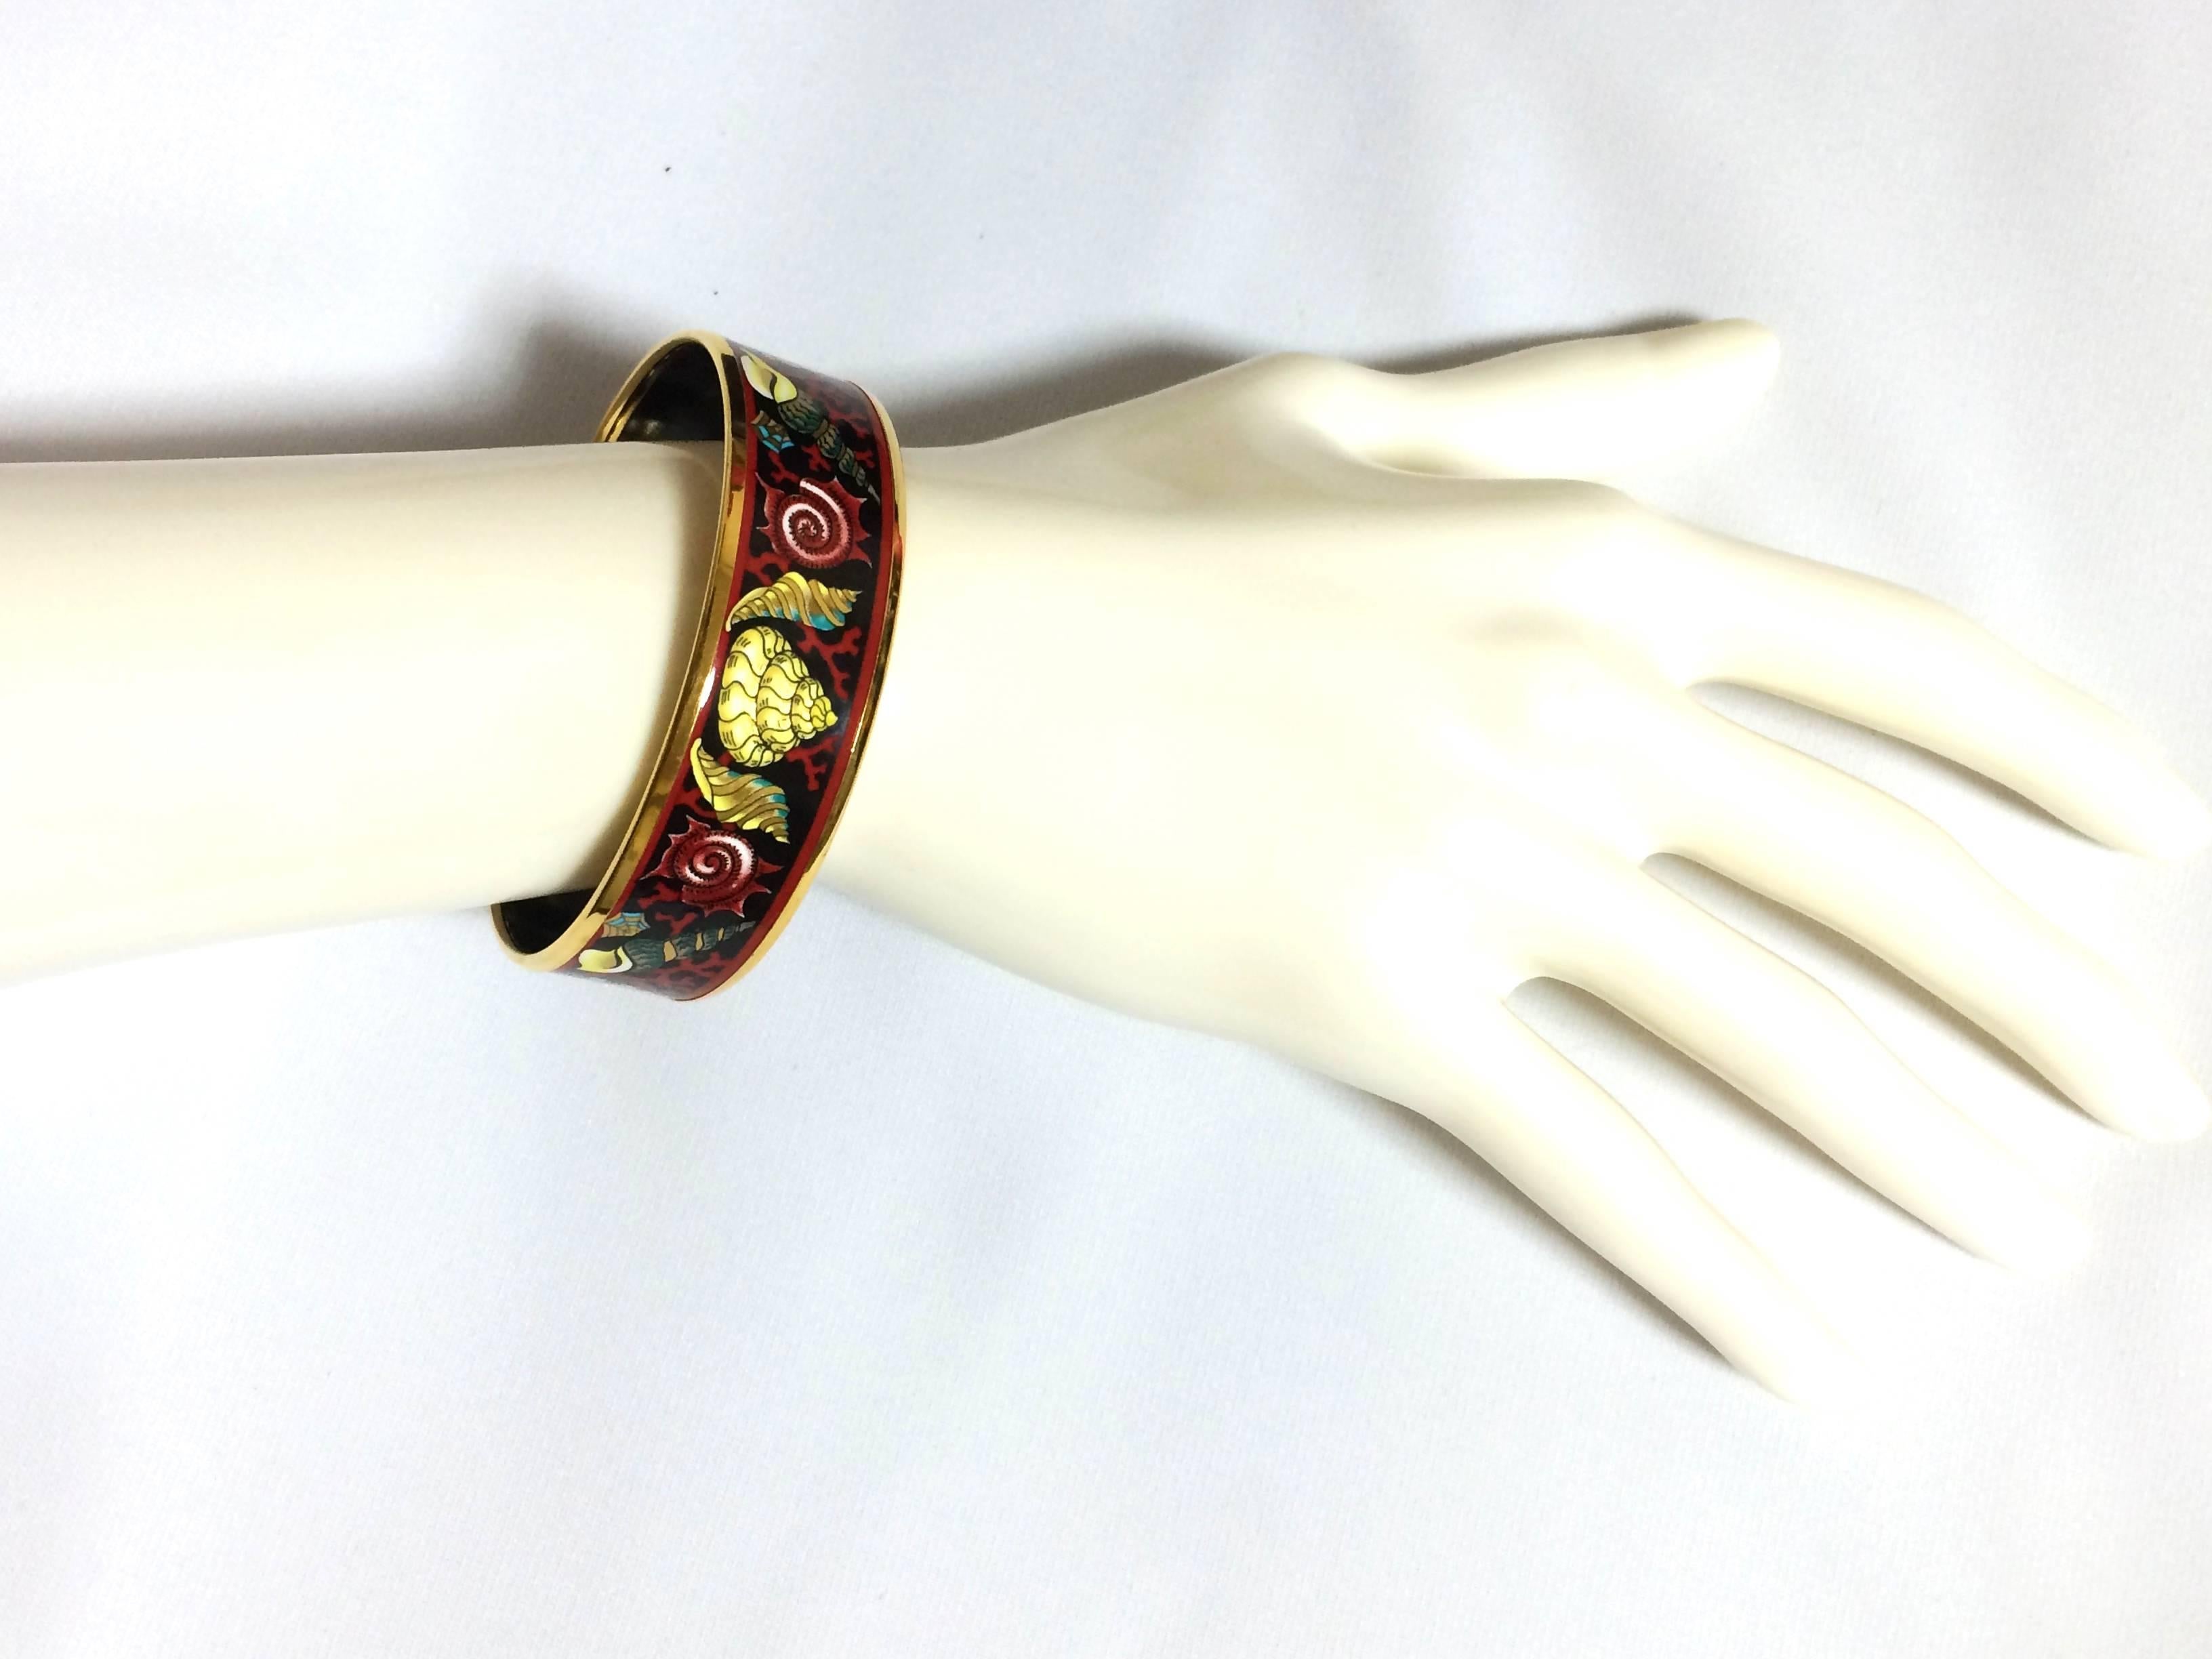 1990s. Vintage Hermes cloisonne enamel golden thick bangle, bracelet  with ocean, black sea, red, gold, blue colorful shell, red coral design.

**The same design in blue and pink version is also on sale.**
***Matching earrings are also for